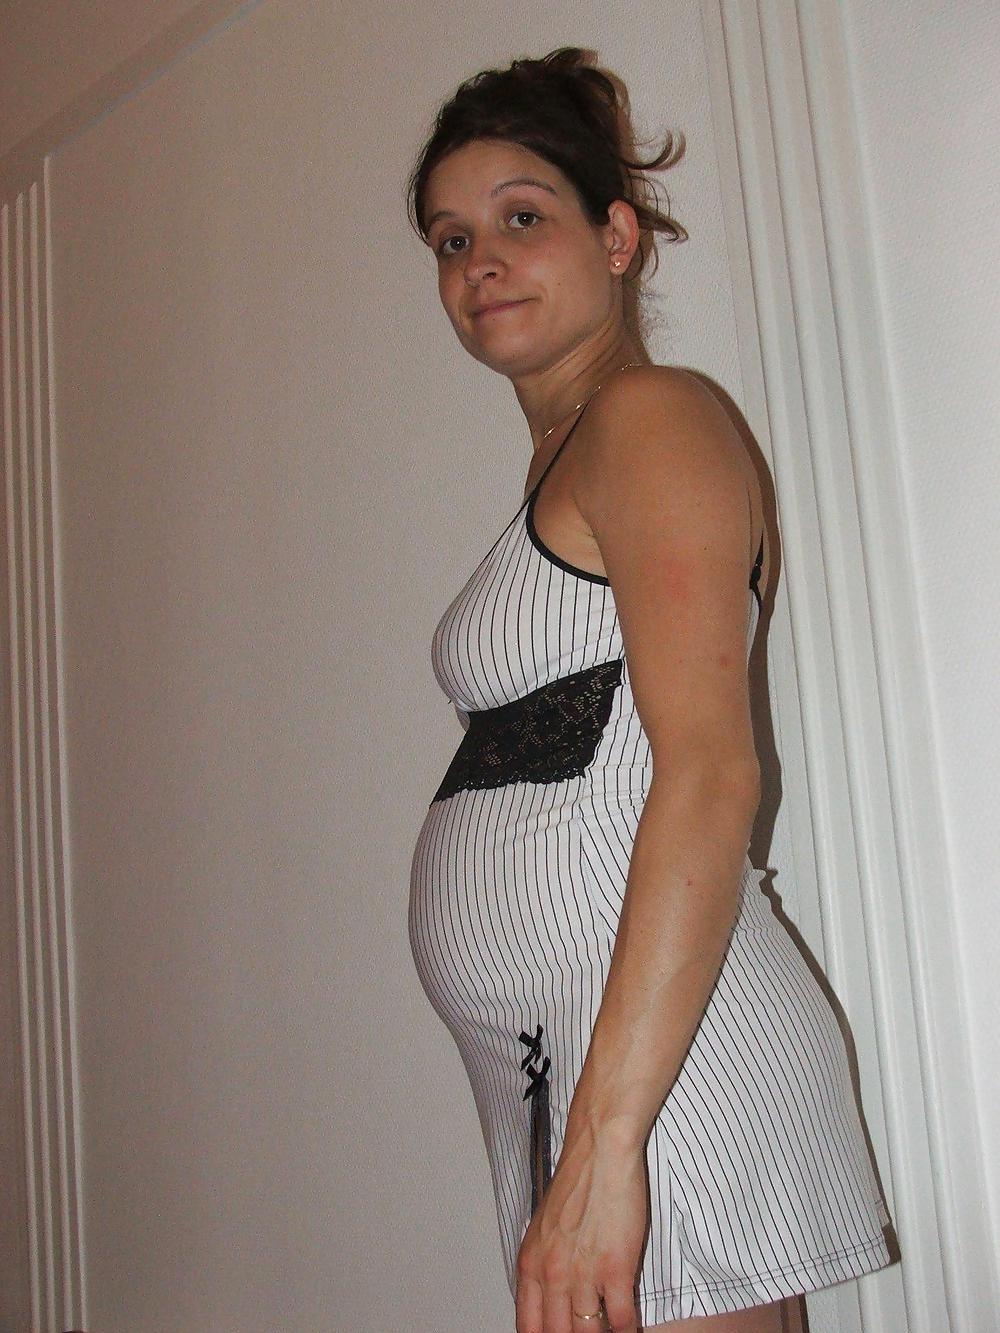 My collection 1 pregnant wife #16333802